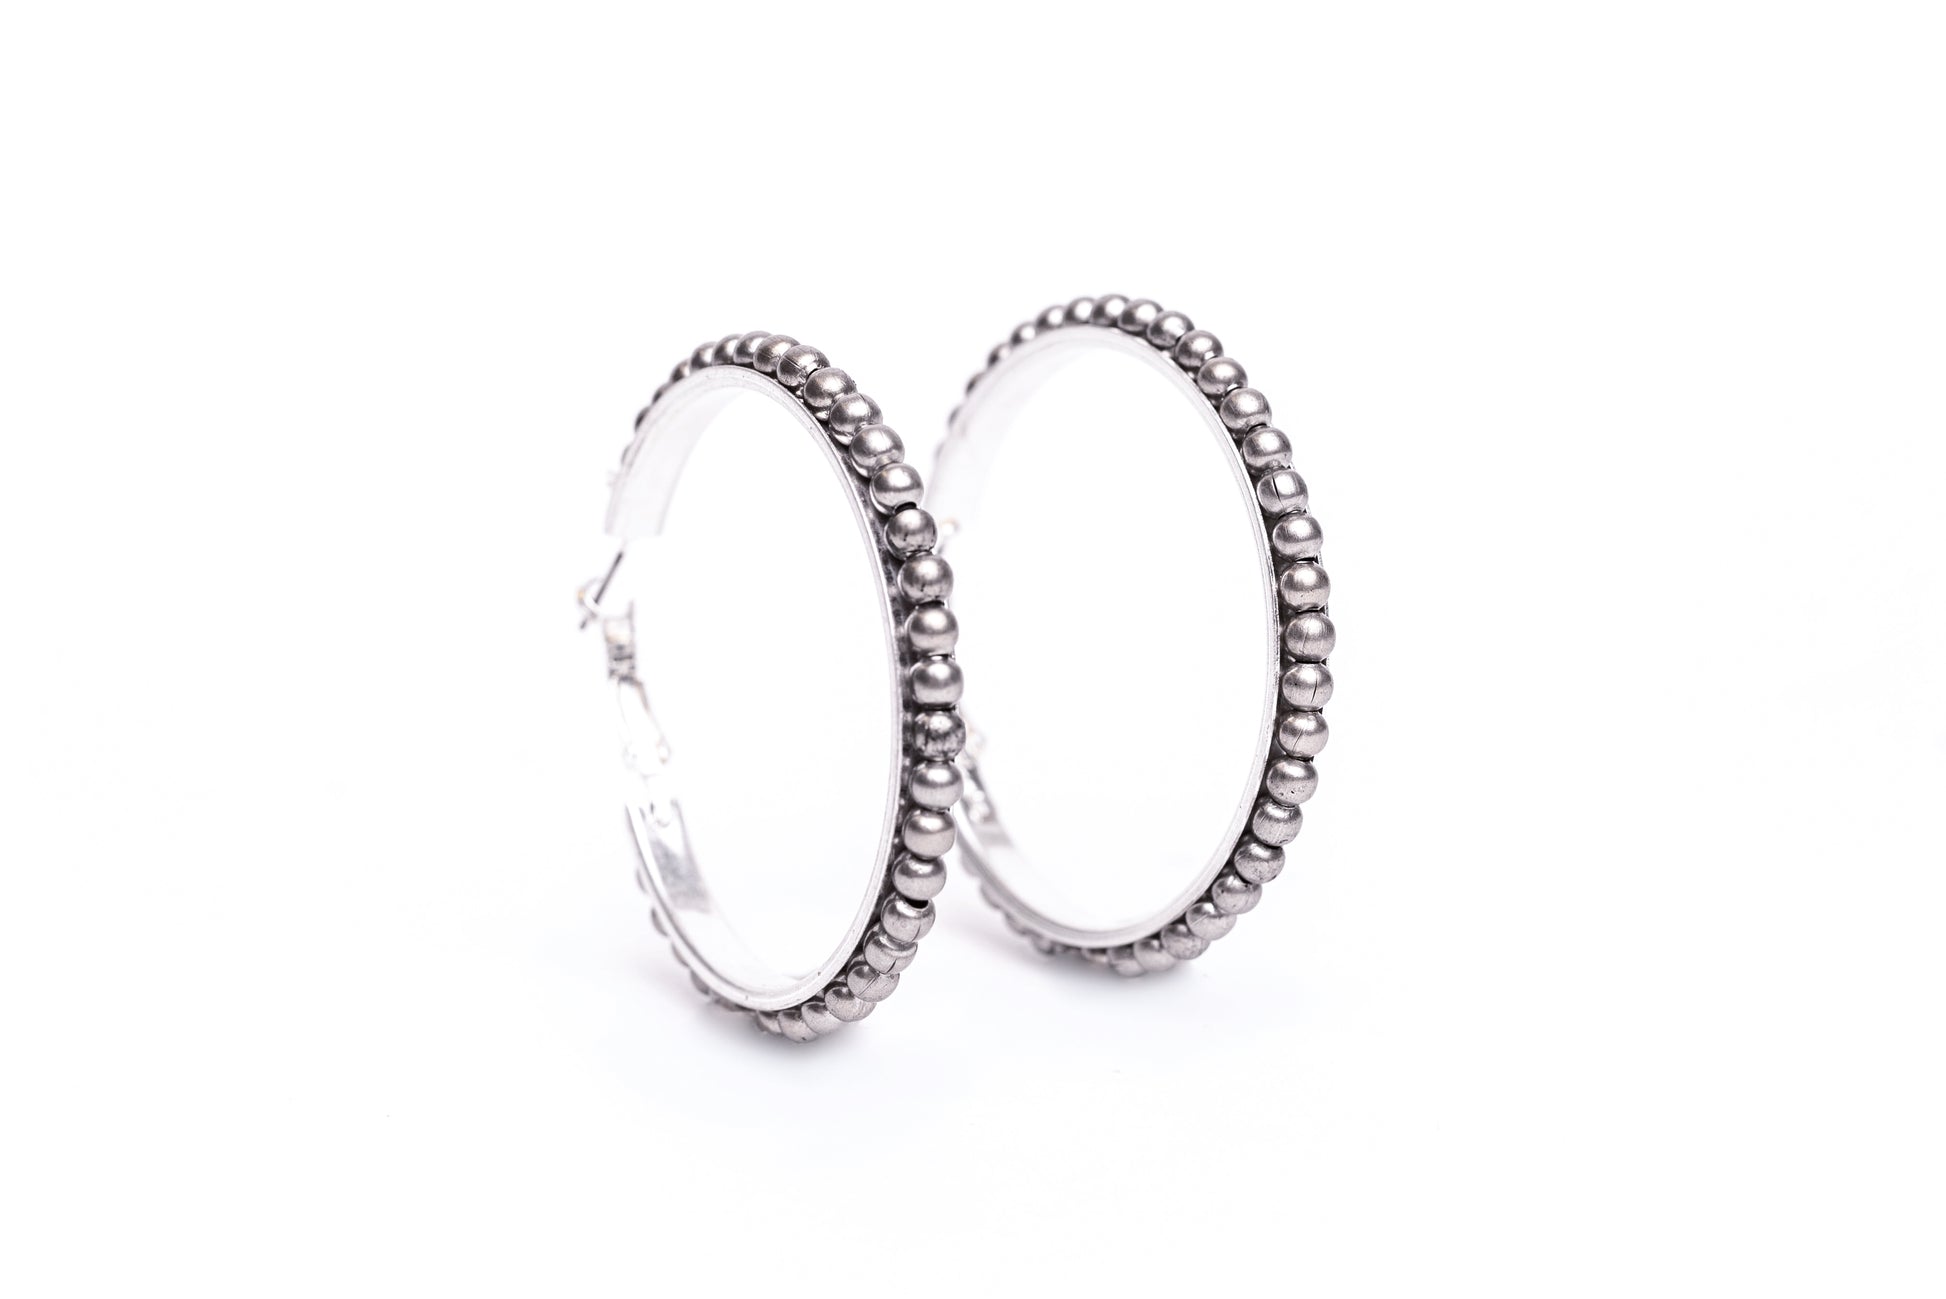 West and Co. Worn Silver Trimmed Hoop Earring-Hoop Earrings-West and Co.--The Twisted Chandelier